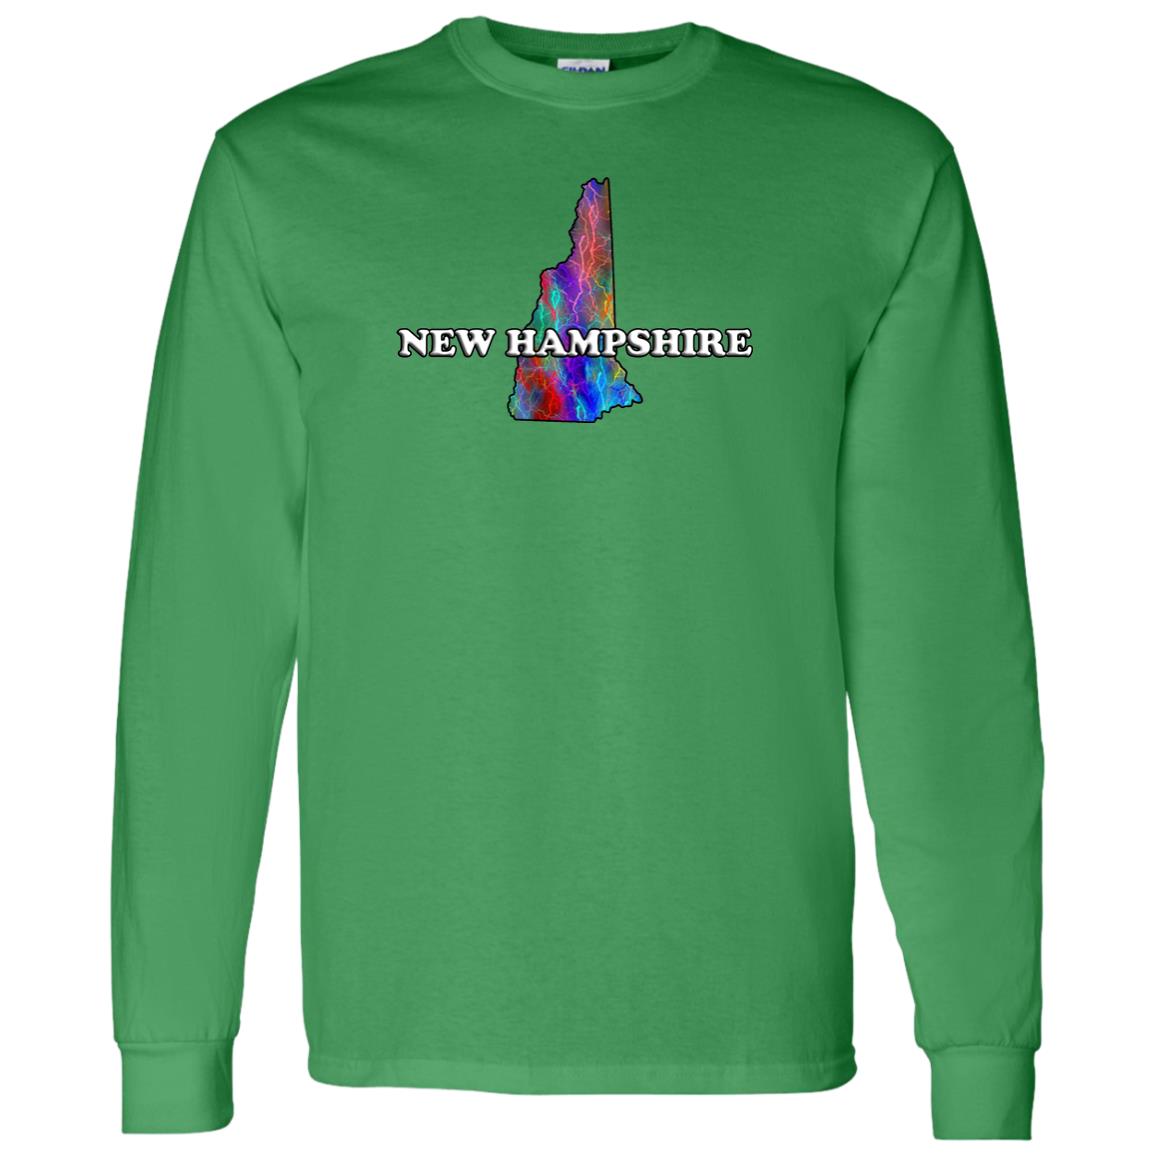 New Hampshire Long Sleeve State T-Shirt